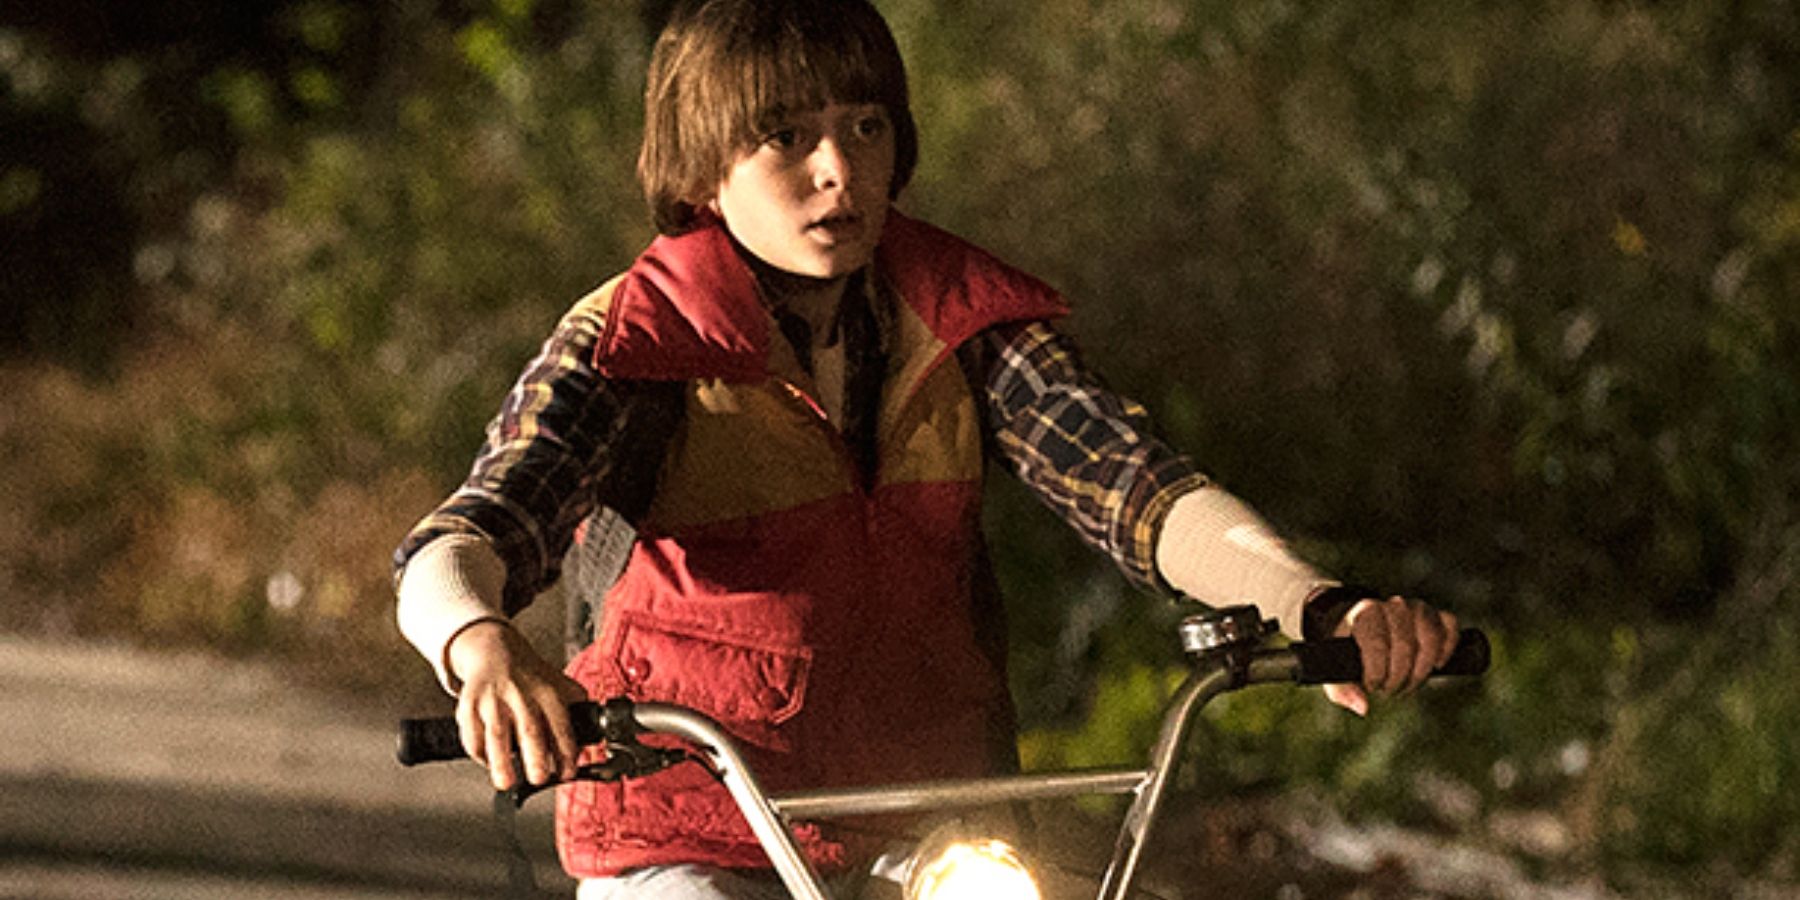 Will Byers riding his bike in season 1 of Stranger Things